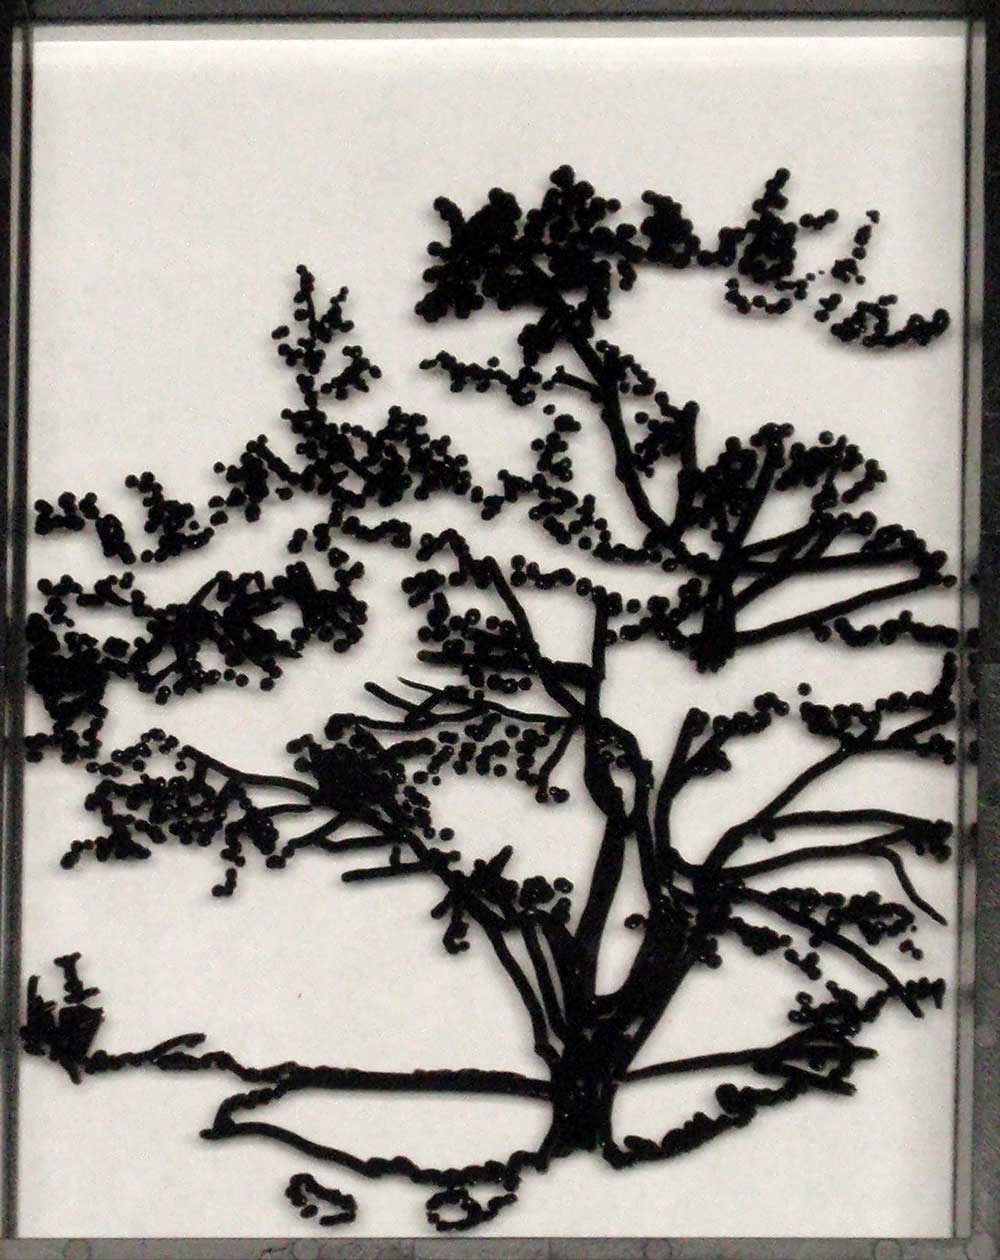 Begin painting tree on glass